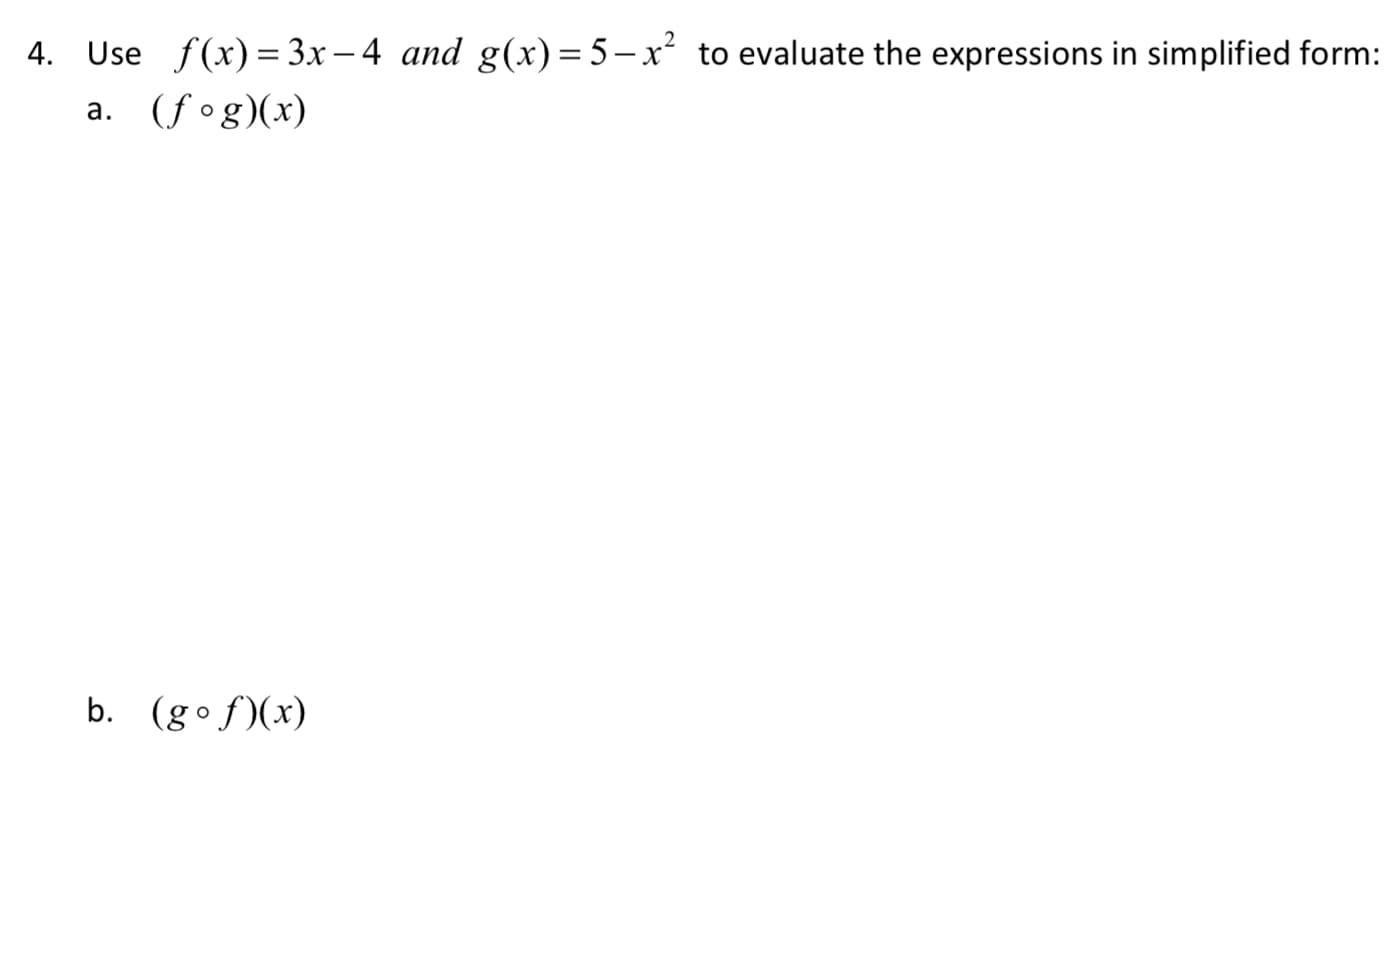 4. Use f(x)= 3x– 4 and g(x)= 5-x² to evaluate the expressions in simplified form:
|
a. (f°g)(x)
